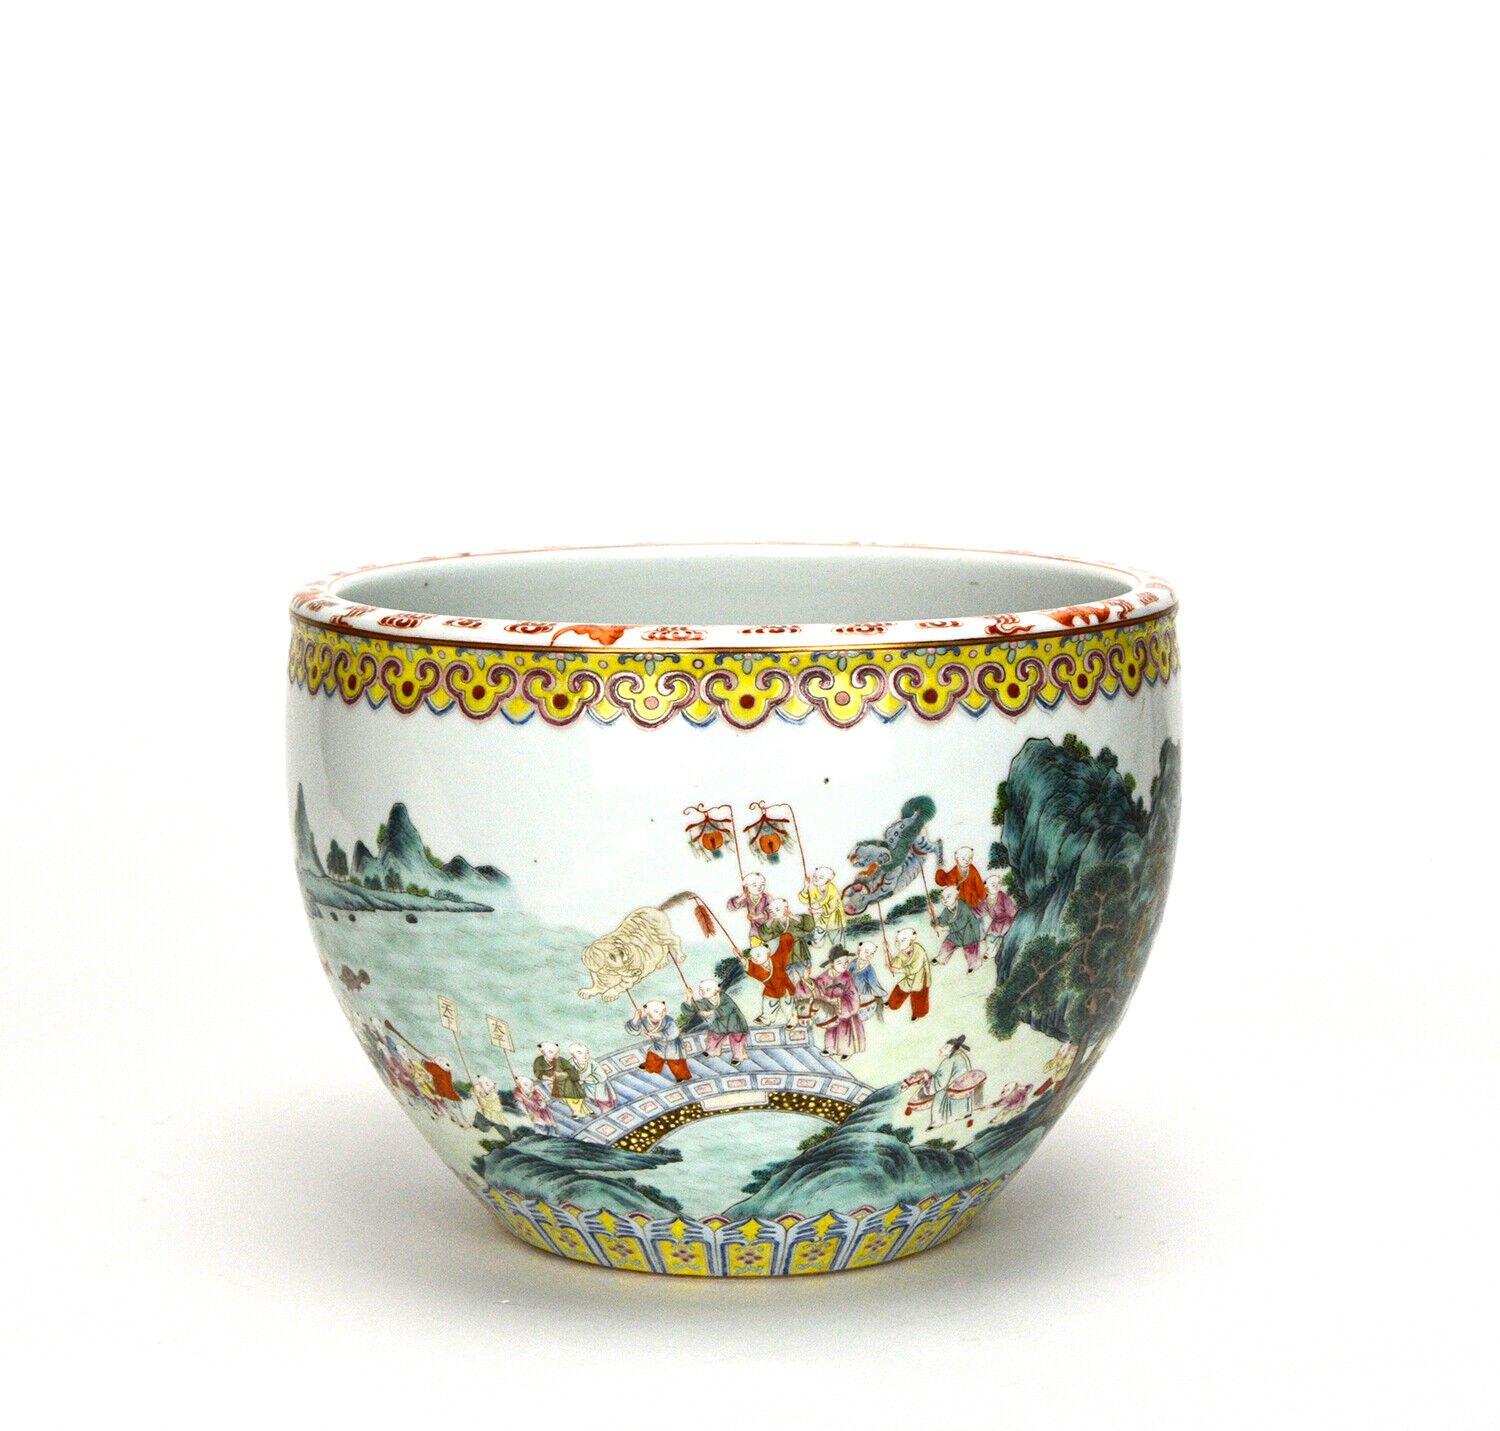 Superb 19th c. Chinese Qing Famille Rose Children in Parade Porcelain Jardiniere